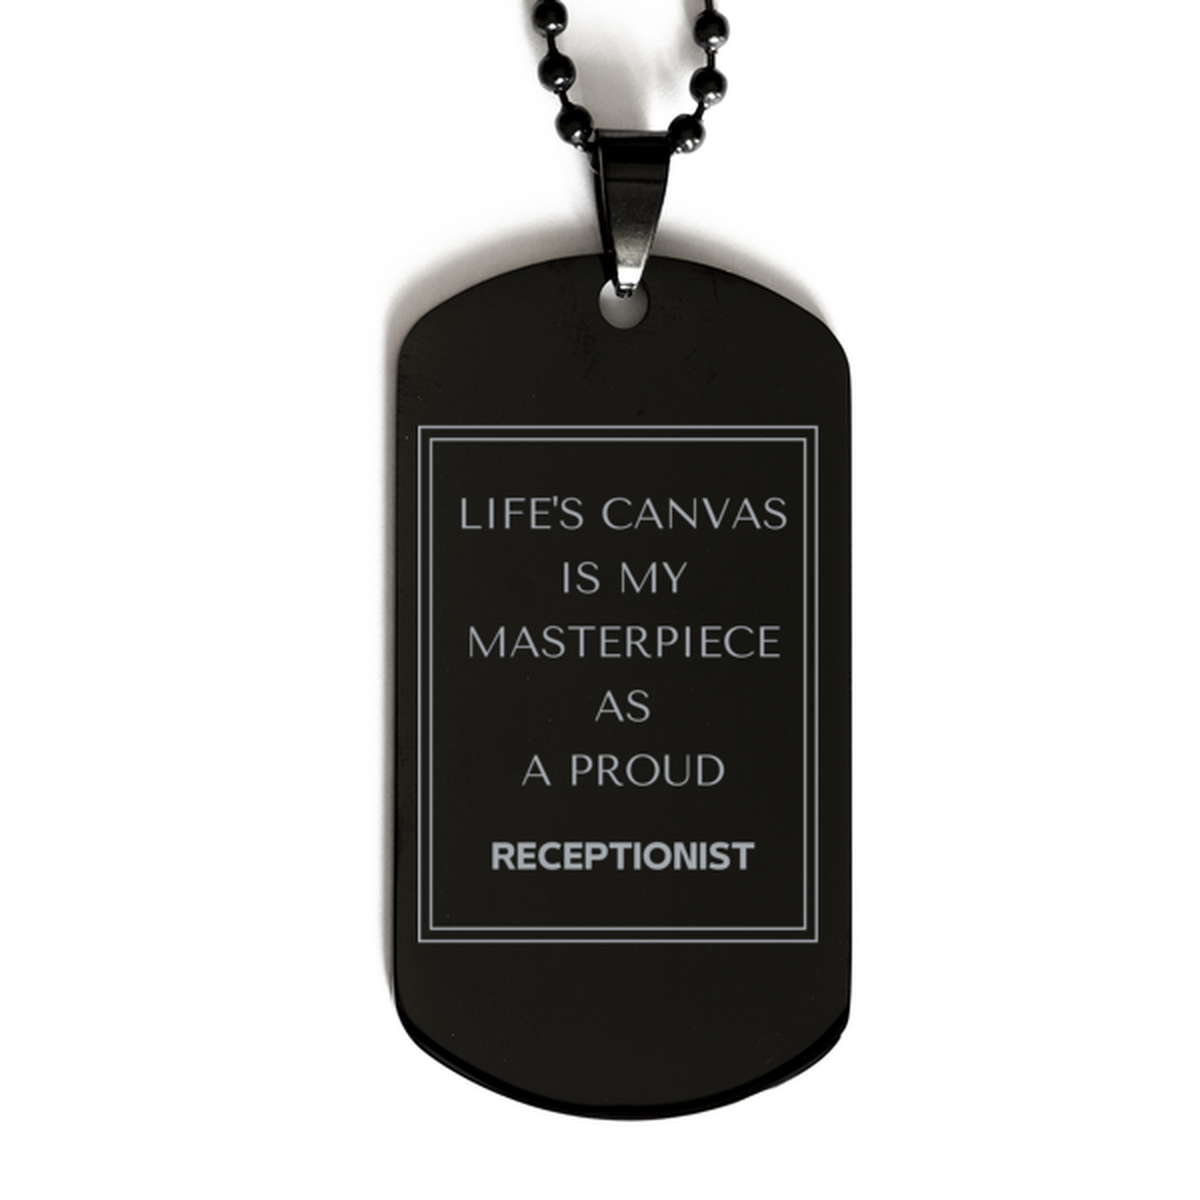 Proud Receptionist Gifts, Life's canvas is my masterpiece, Epic Birthday Christmas Unique Black Dog Tag For Receptionist, Coworkers, Men, Women, Friends